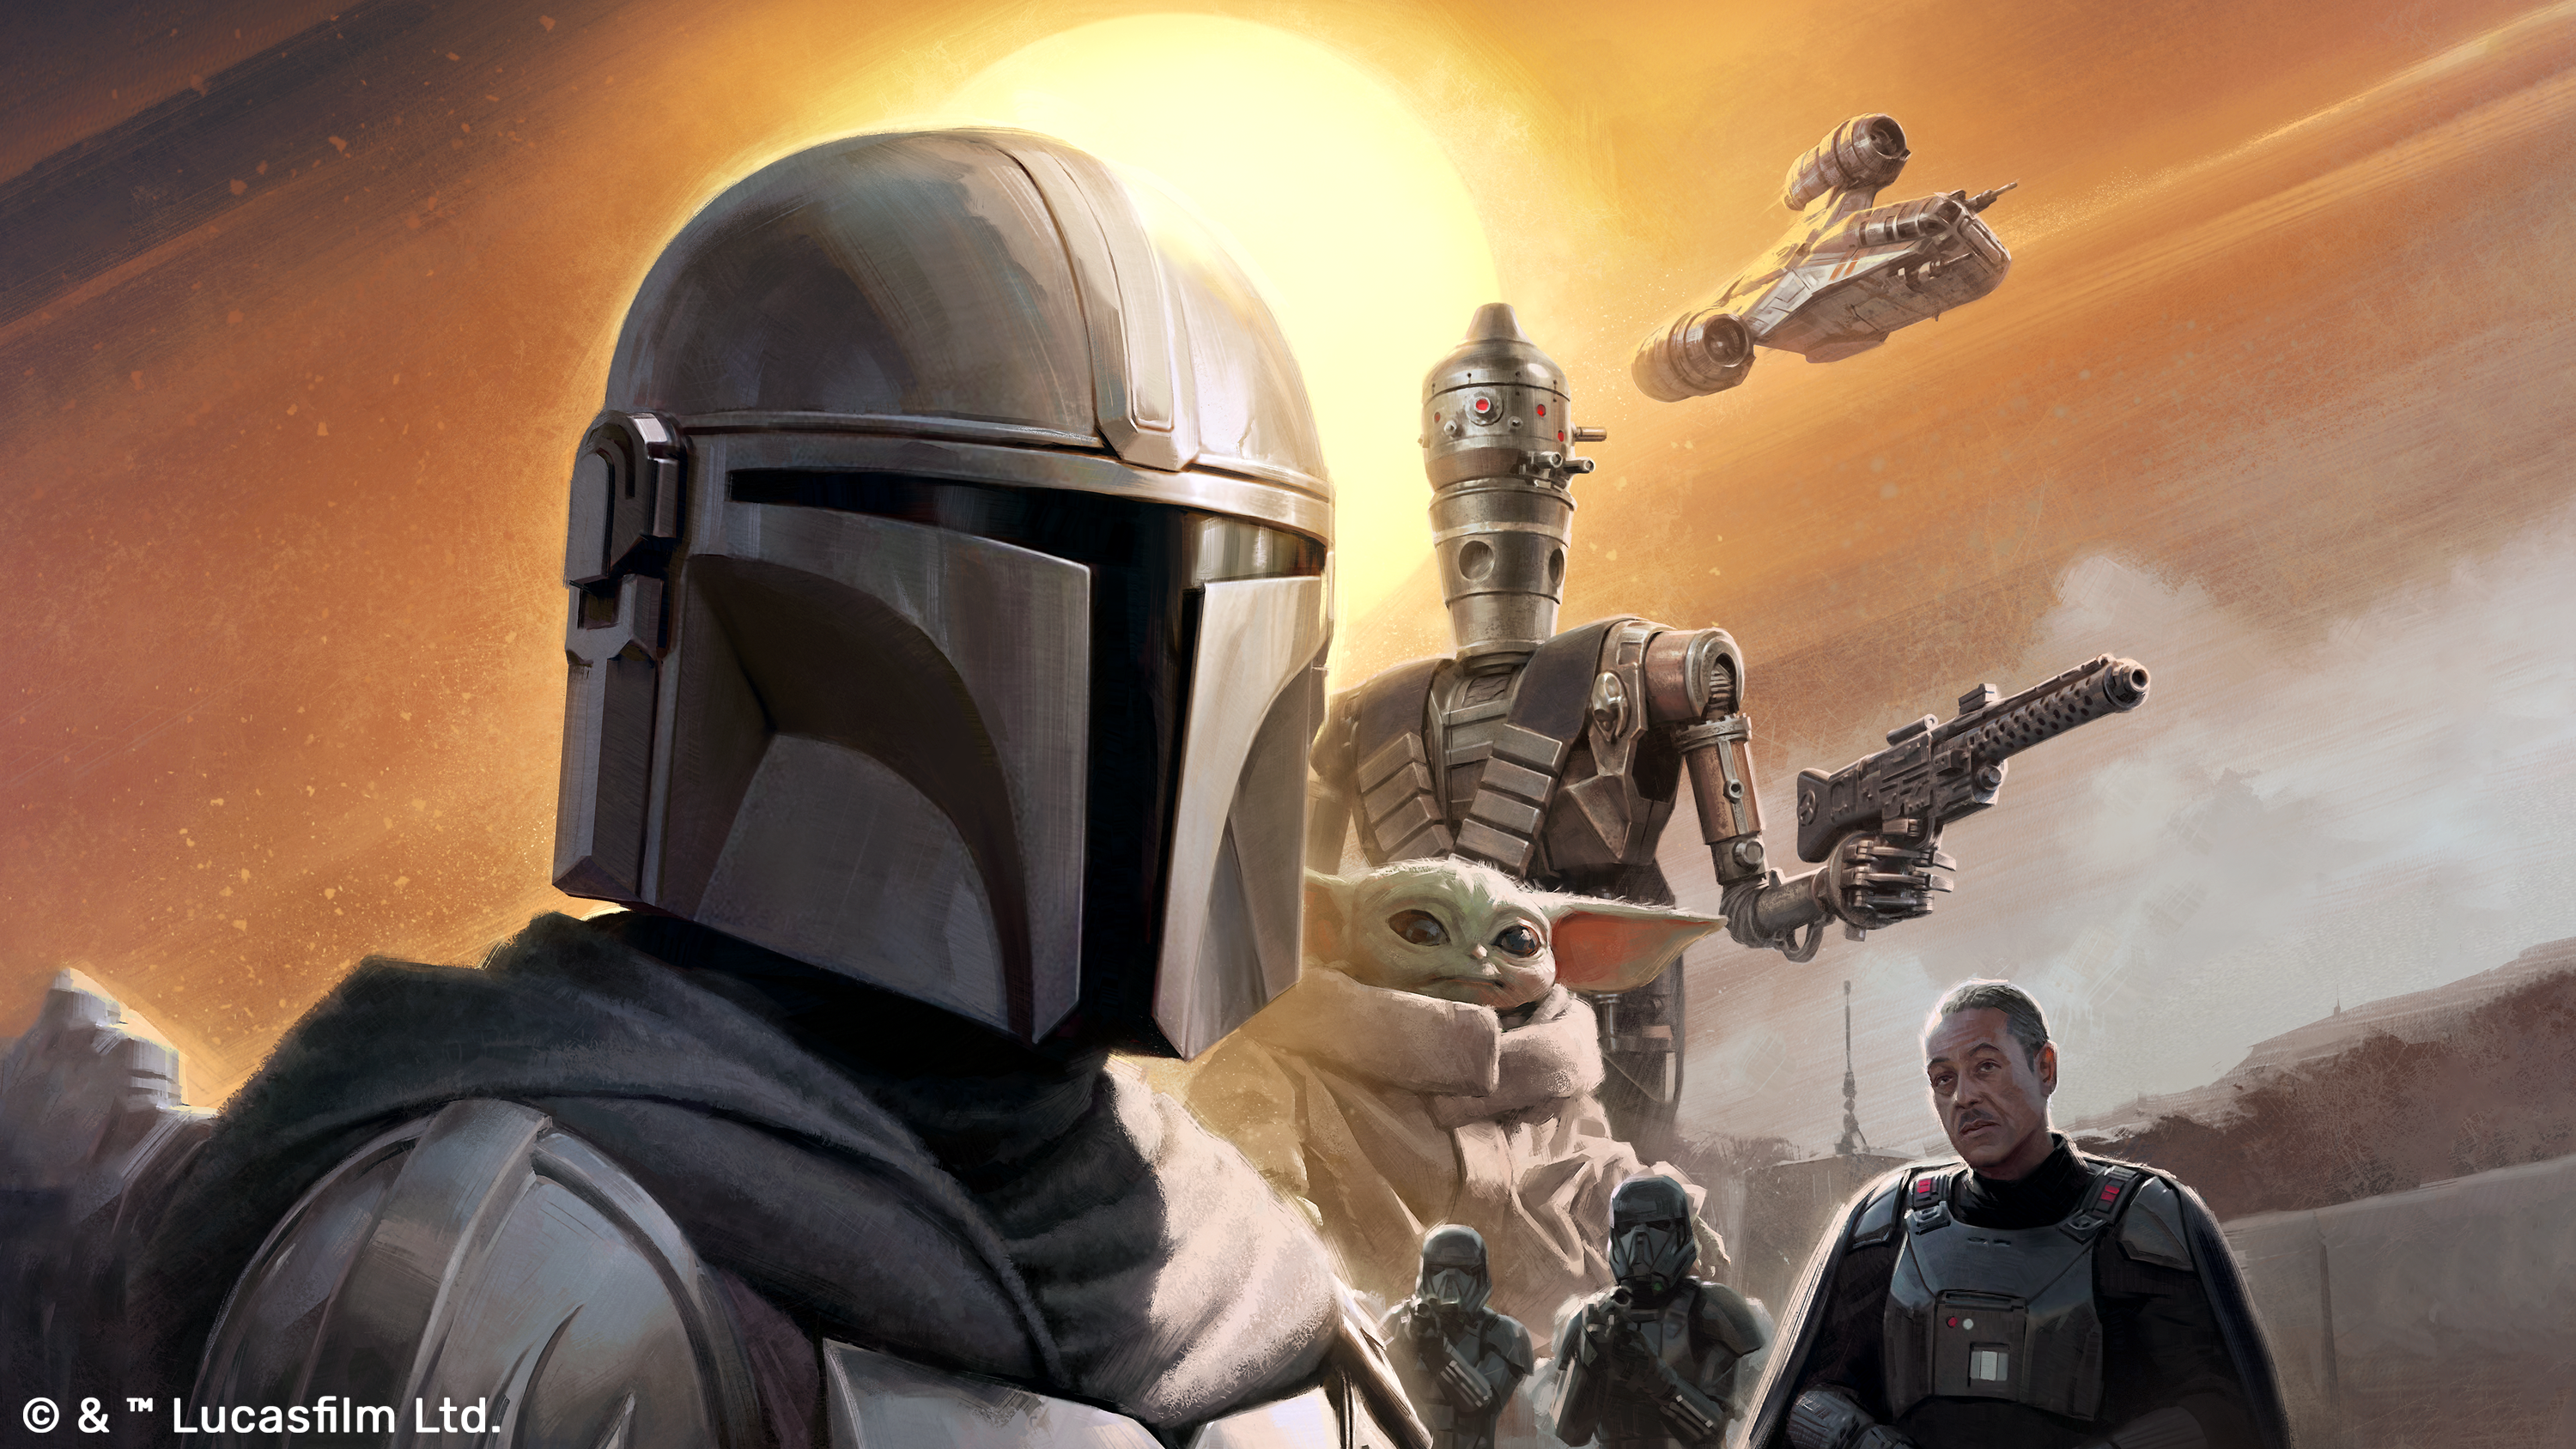 Key art for The Mandalorian: Adventures board game features Mando, IG-11, The Child, and a smattering of Dark Troopers as well.